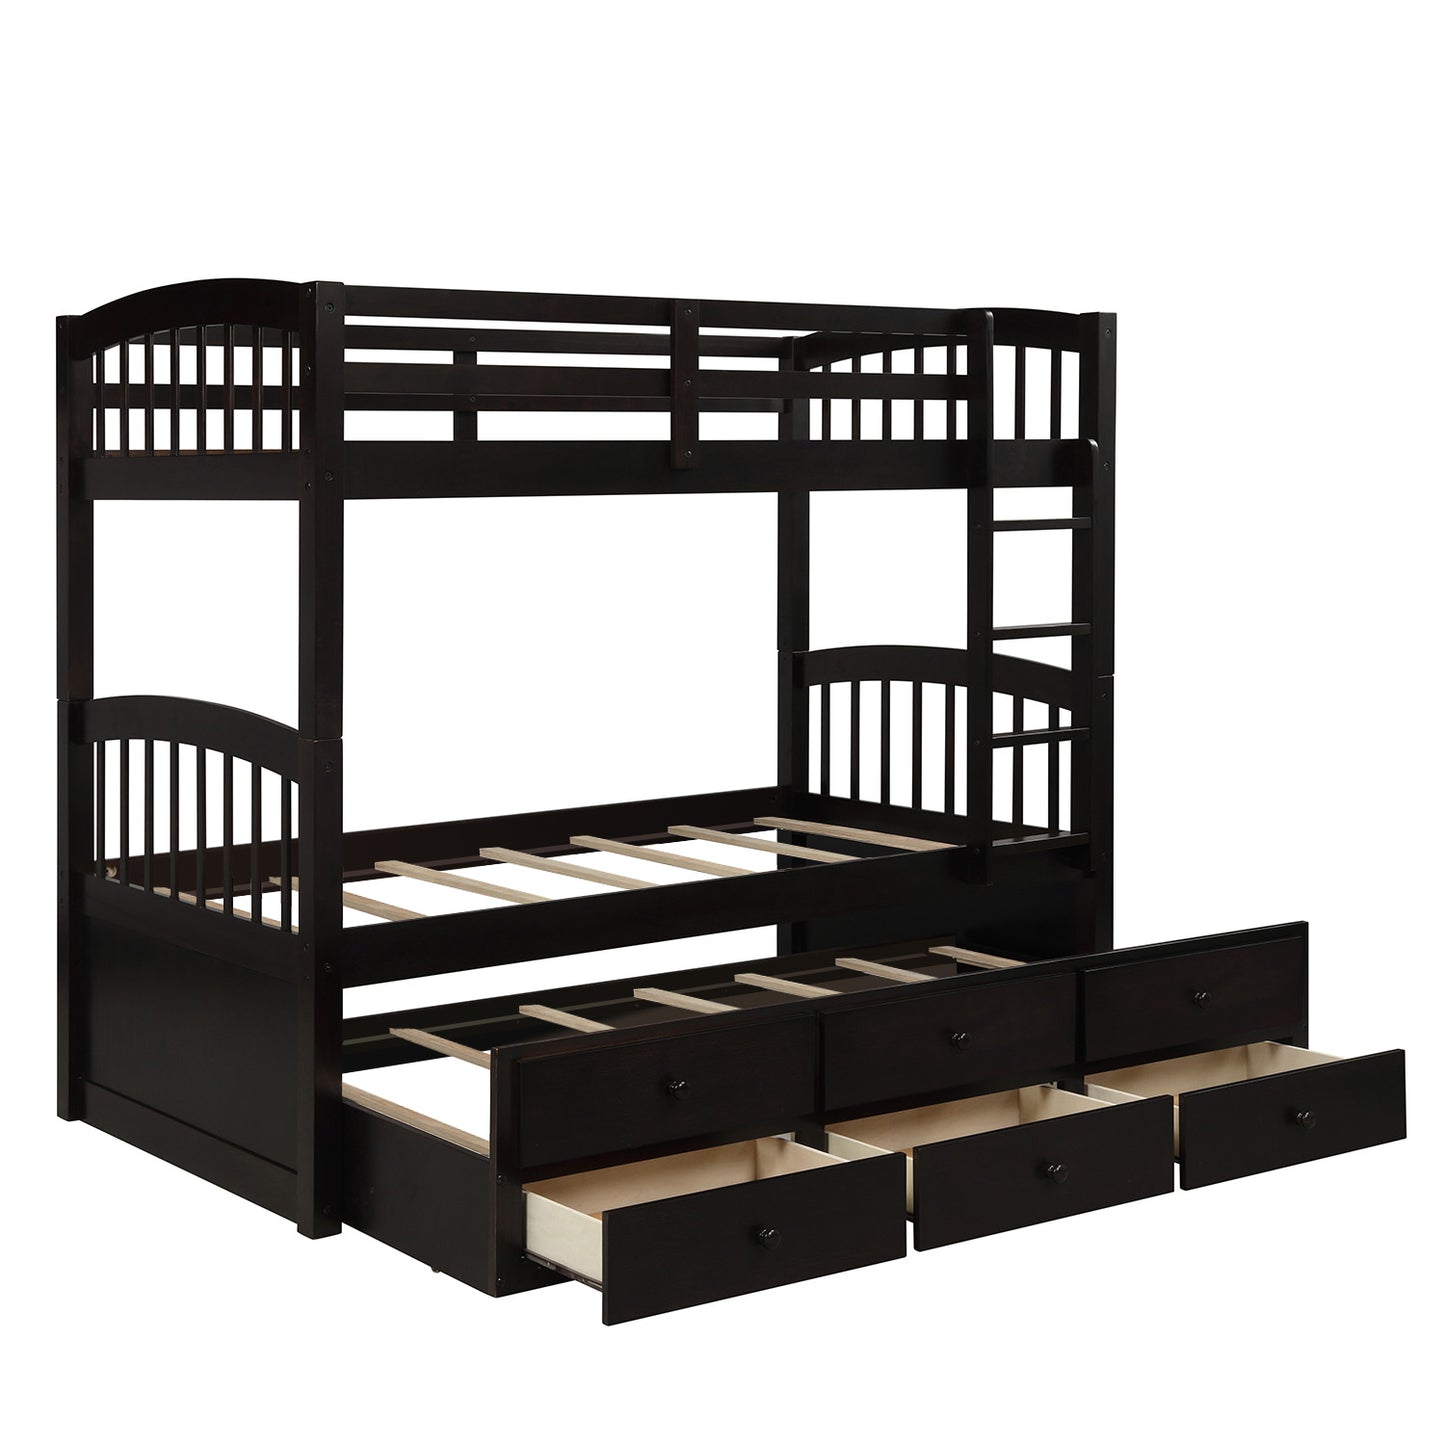 Twin Bunk Bed with Ladder, Safety Rail, Twin Trundle Bed with 3 Drawers for Teens Bedroom, Guest Room Furniture(Espresso)